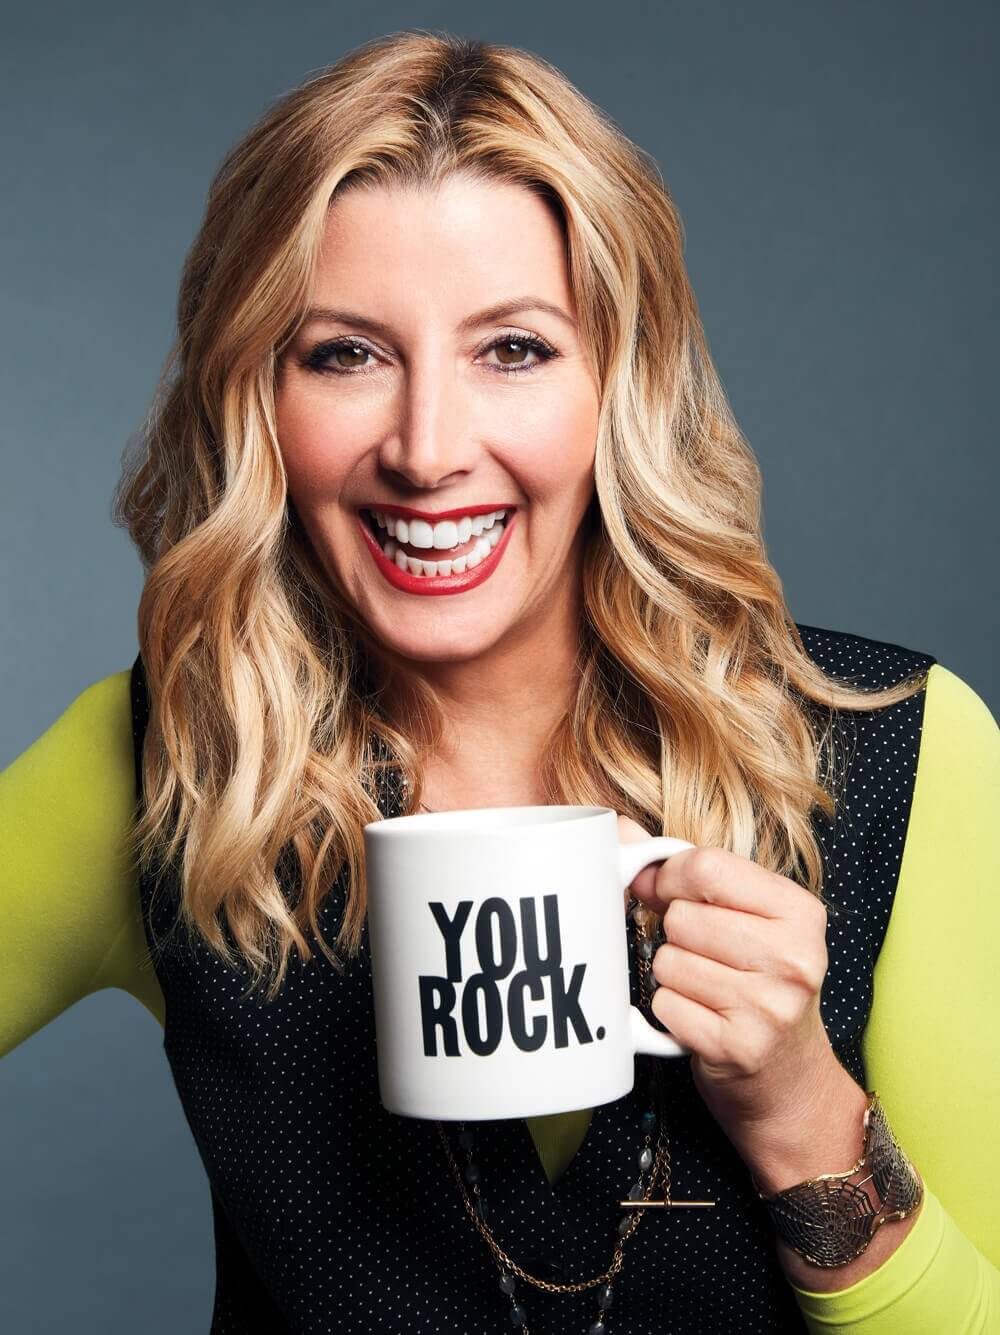 Meet Sara Blakely, the youngest millionaire who created her own fortune